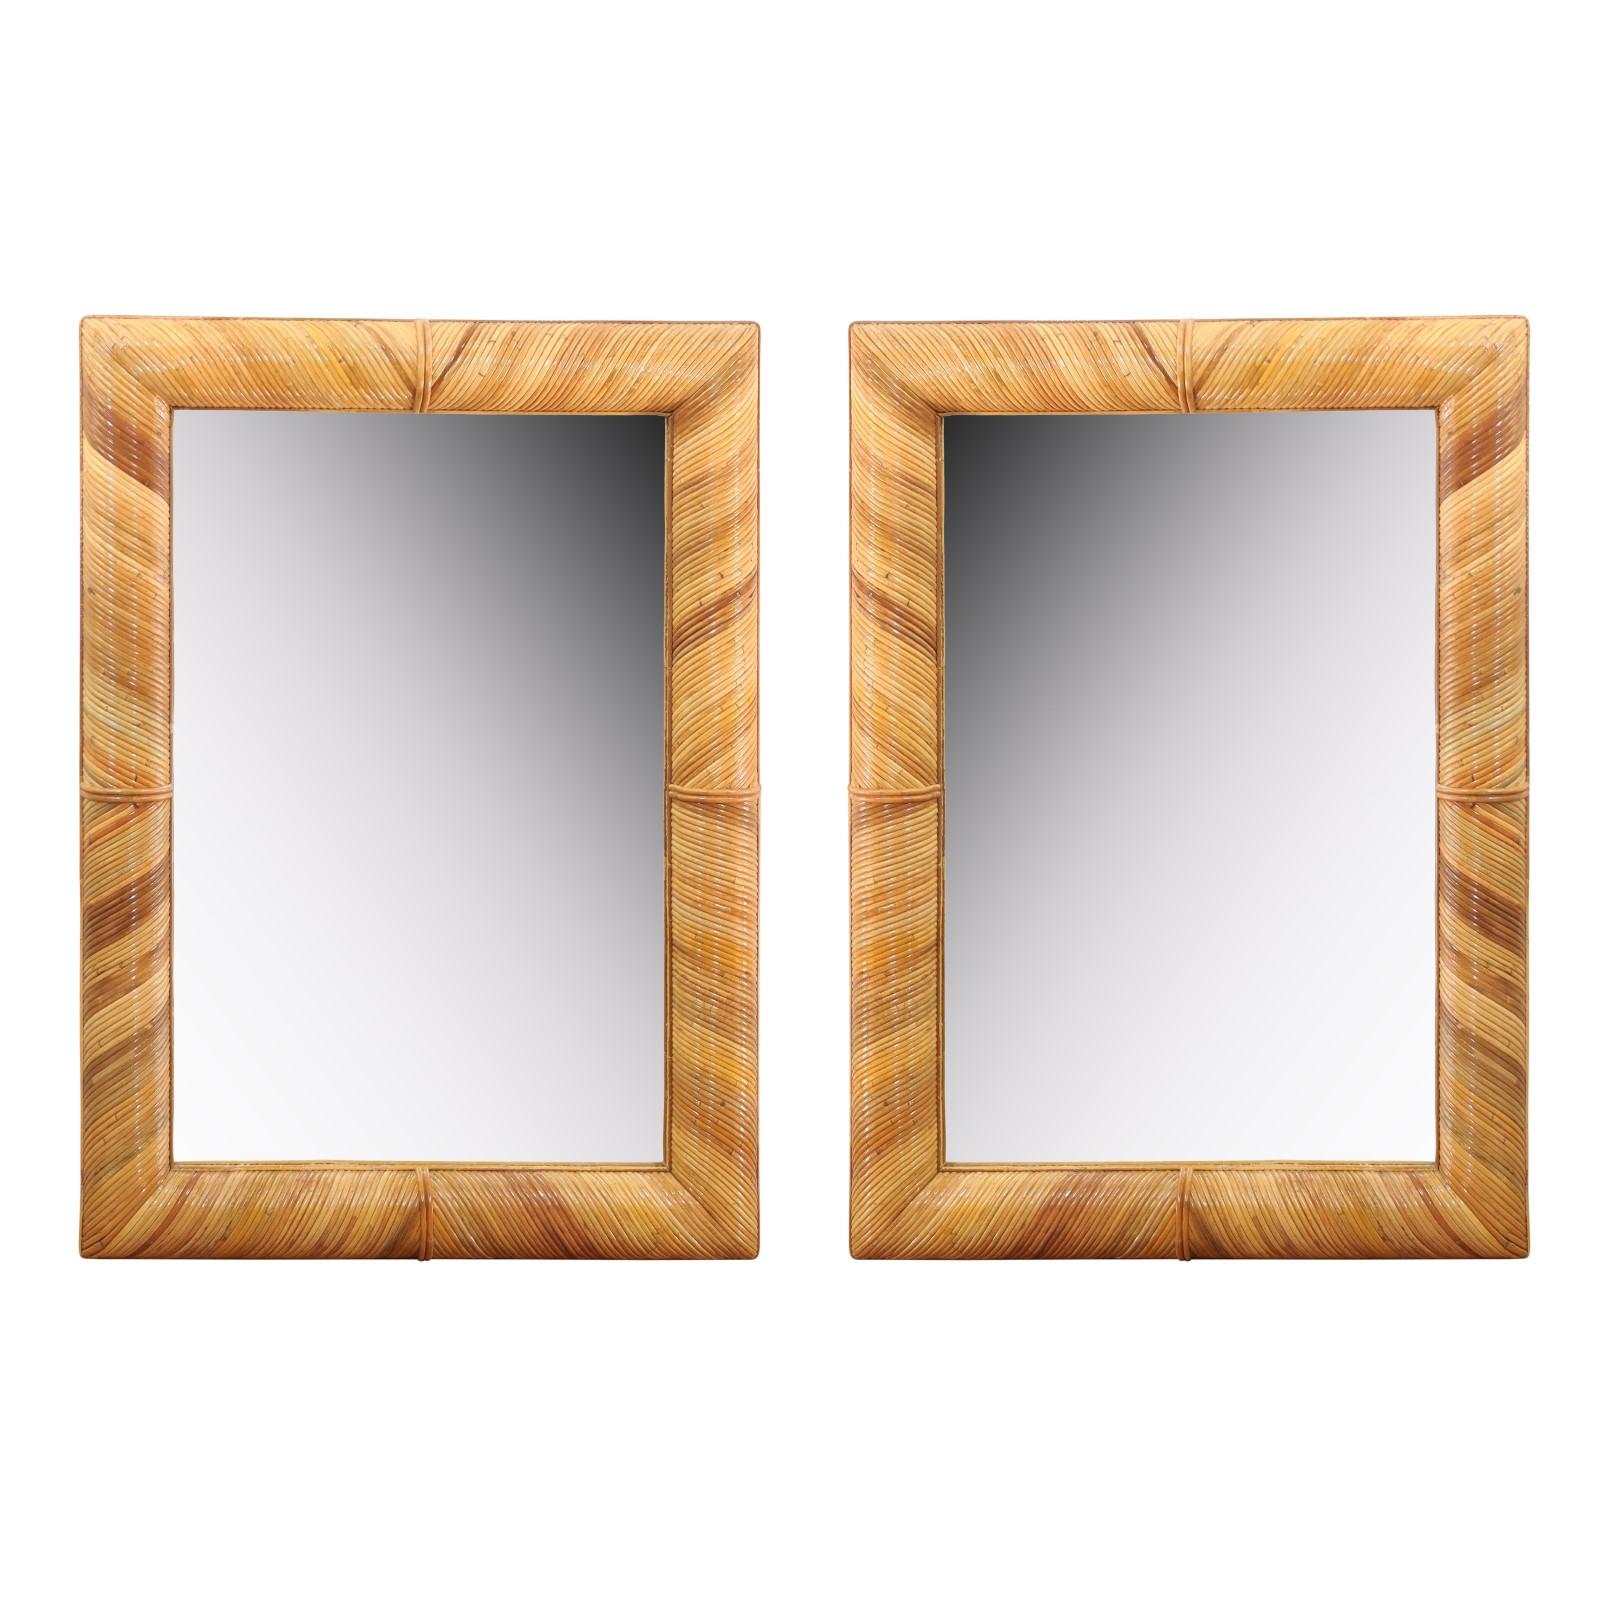 A fabulous vintage mirror, circa 1980. Stout hardwood frame painstakingly veneered in diagonally applied reed bamboo. Exceptional craftsmanship. Exquisite jewelry! Excellent restored condition. The piece has been professionally cleaned and